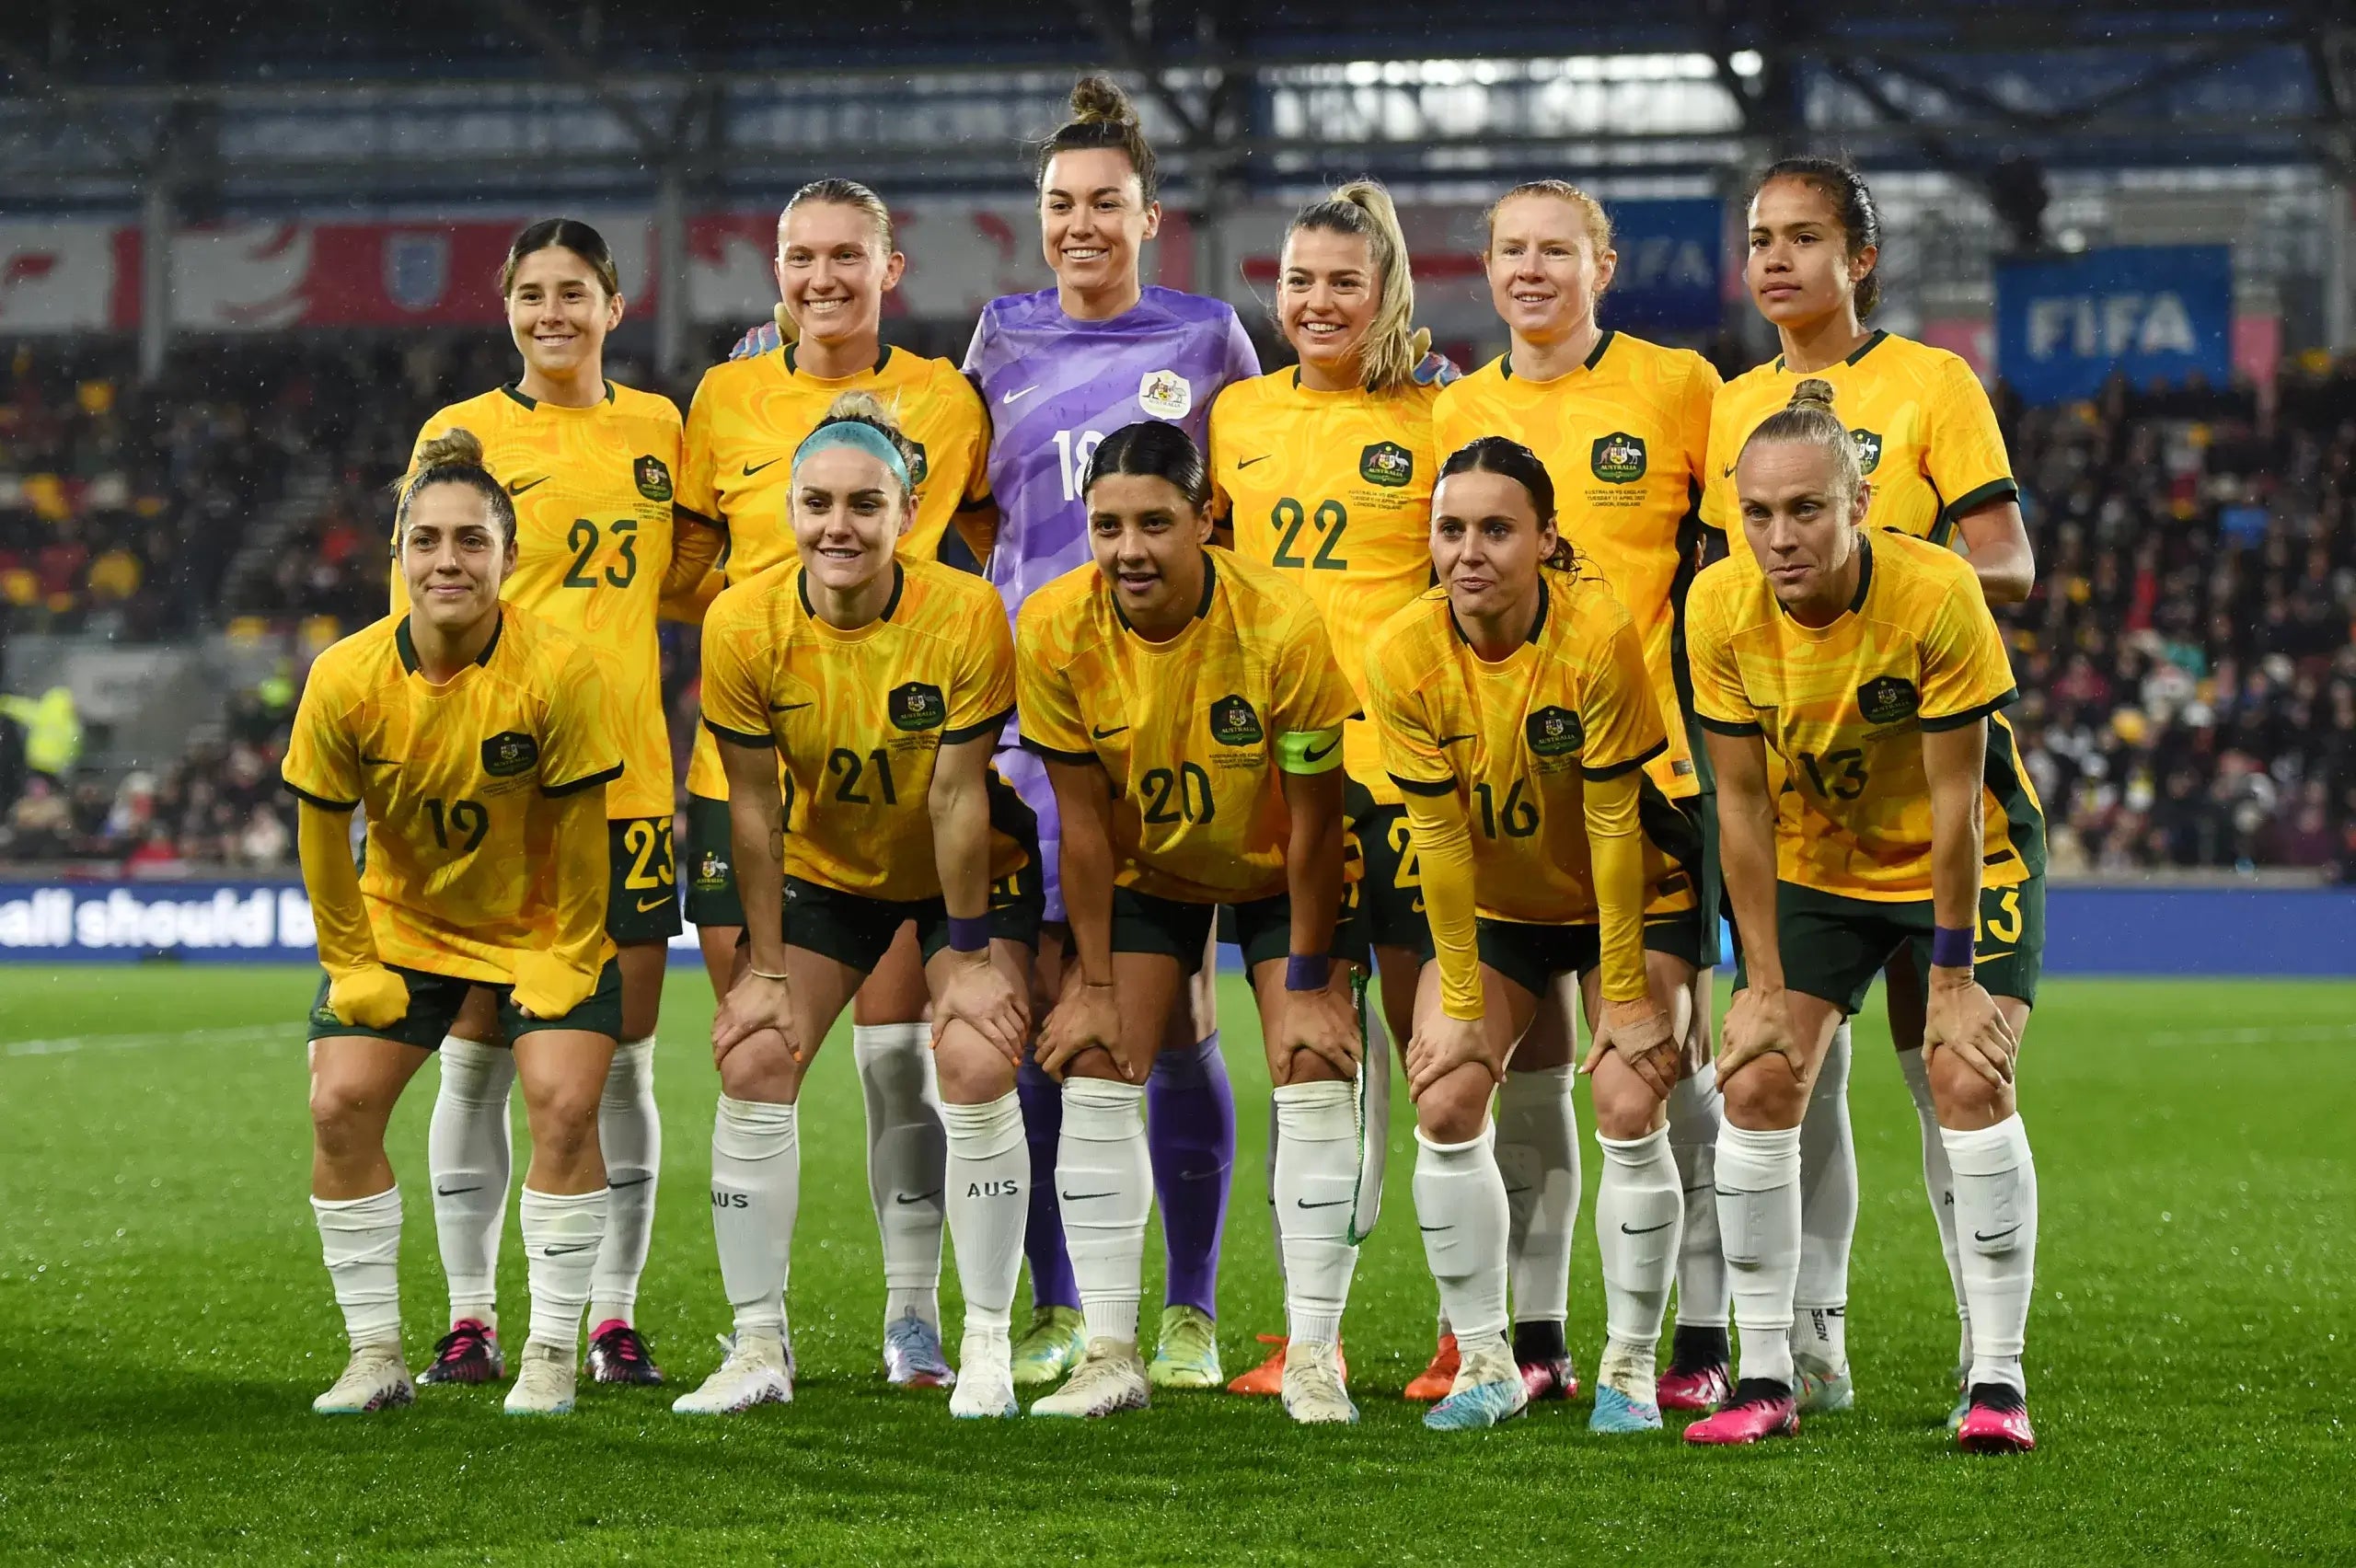 City Edition: Women's World Cup Preview - Australia